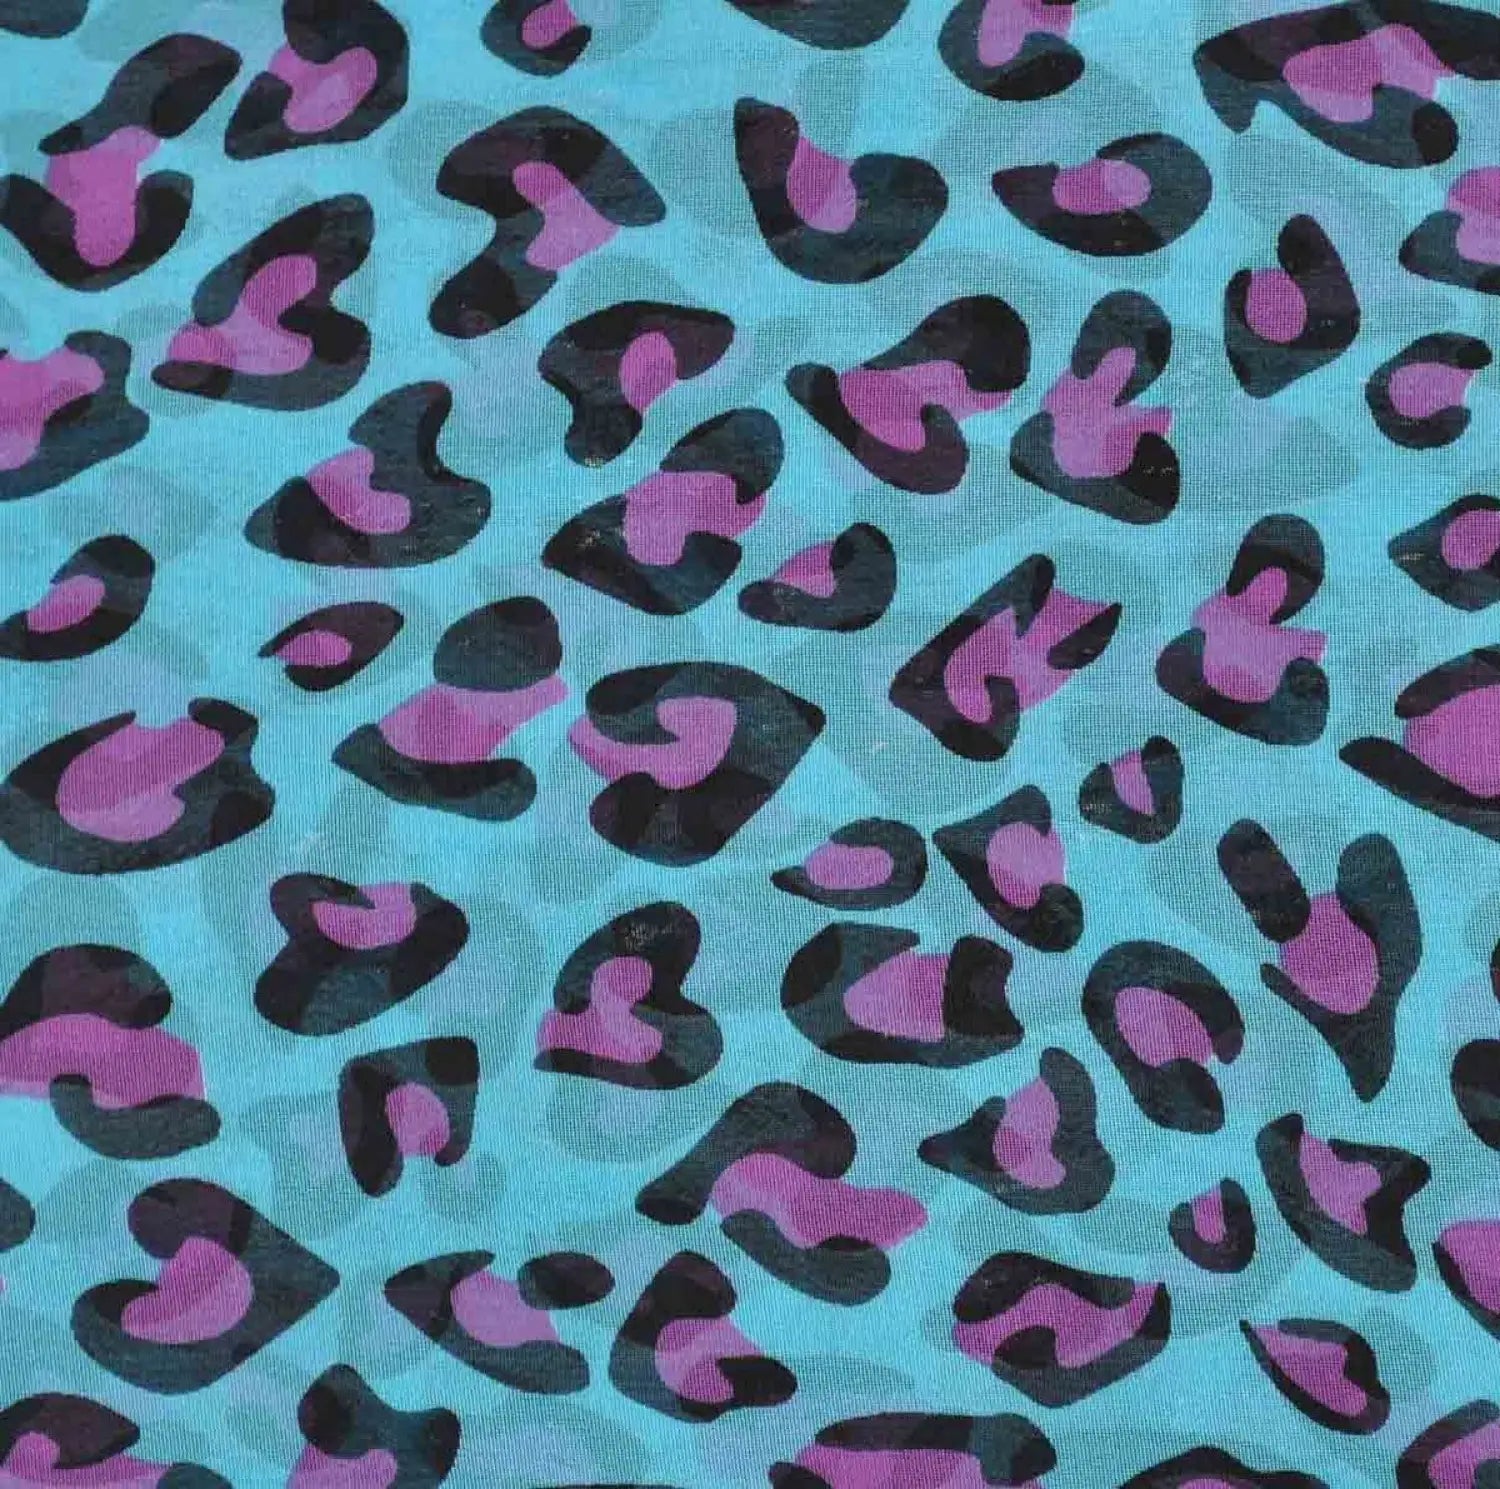 Blue and pink leopard print chiffon scarf with chain border pattern